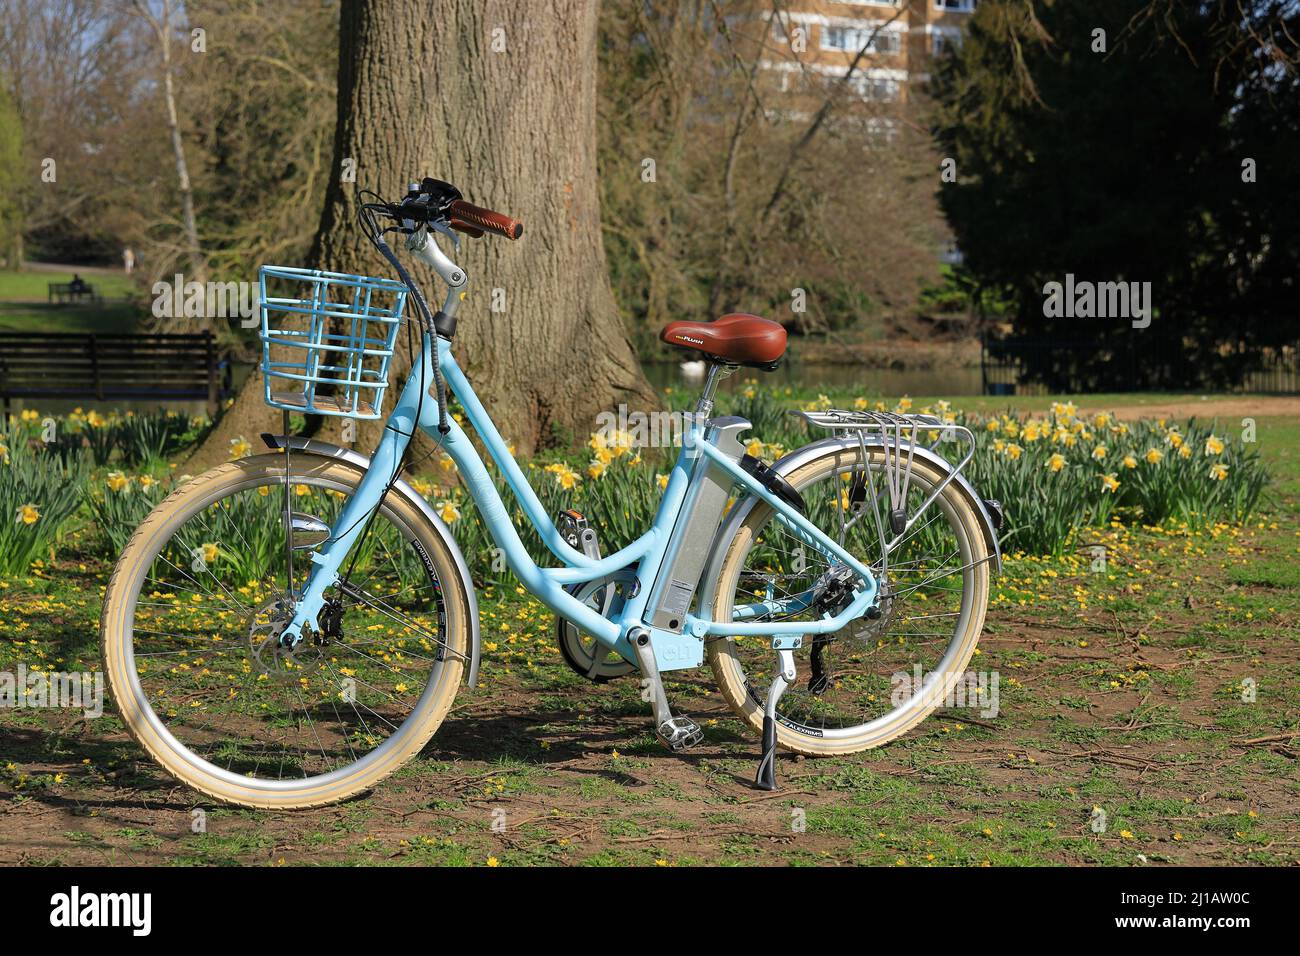 Ladies classic Dutch step through style electric bicycle, eco friendly sustainable go anywhere transport in beautiful park setting with spring flowers Stock Photo